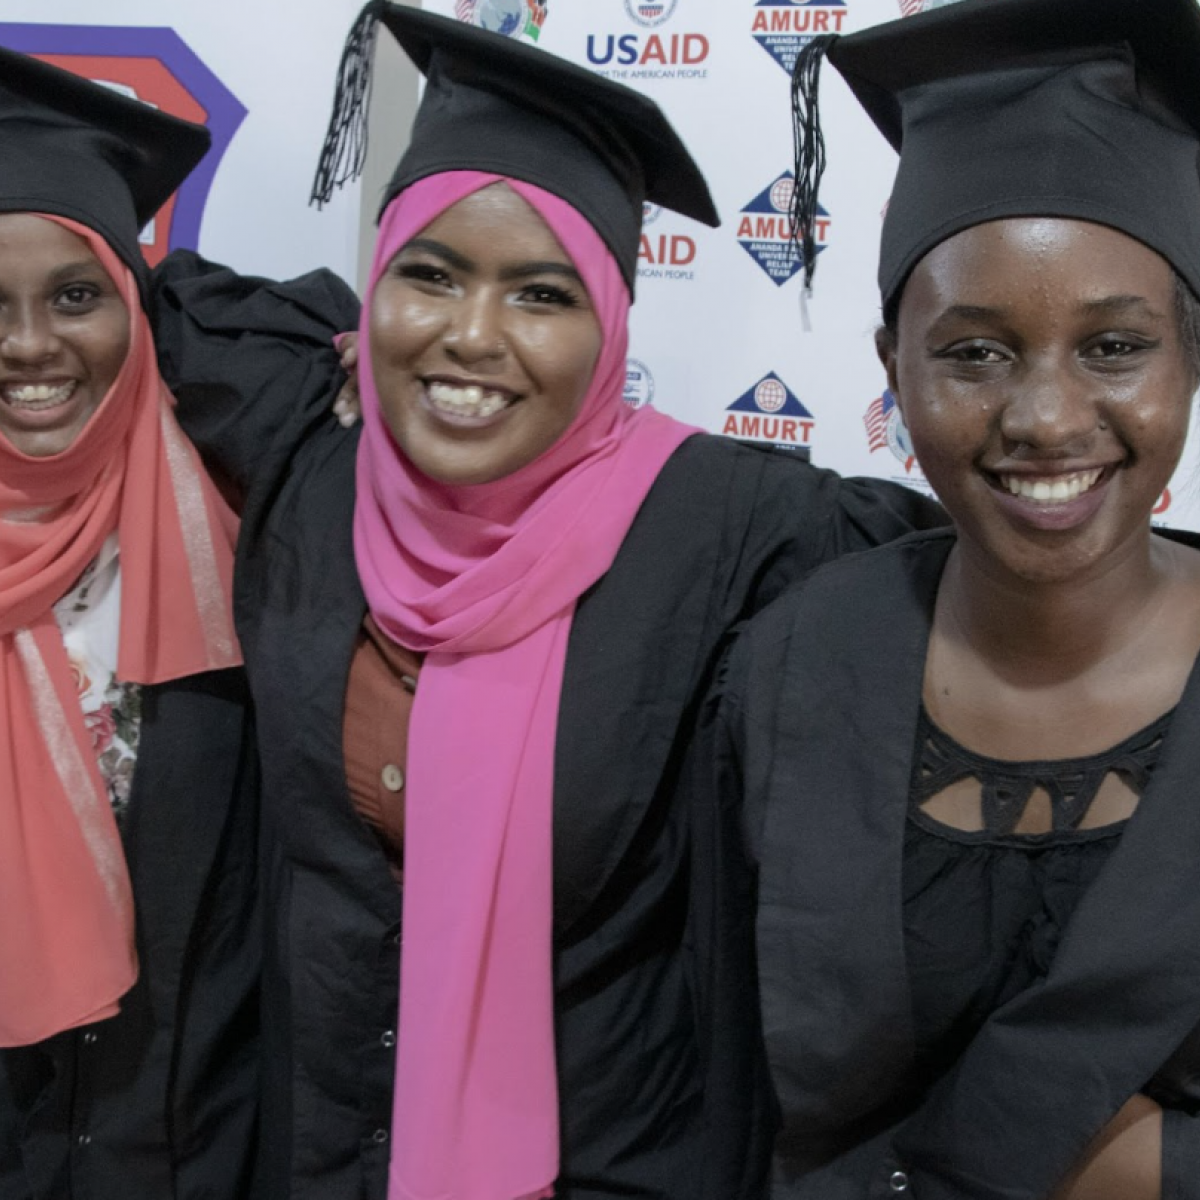 Graduates of a youth capacity building project who received training on housekeeping, job placement, and financial literacy and savings